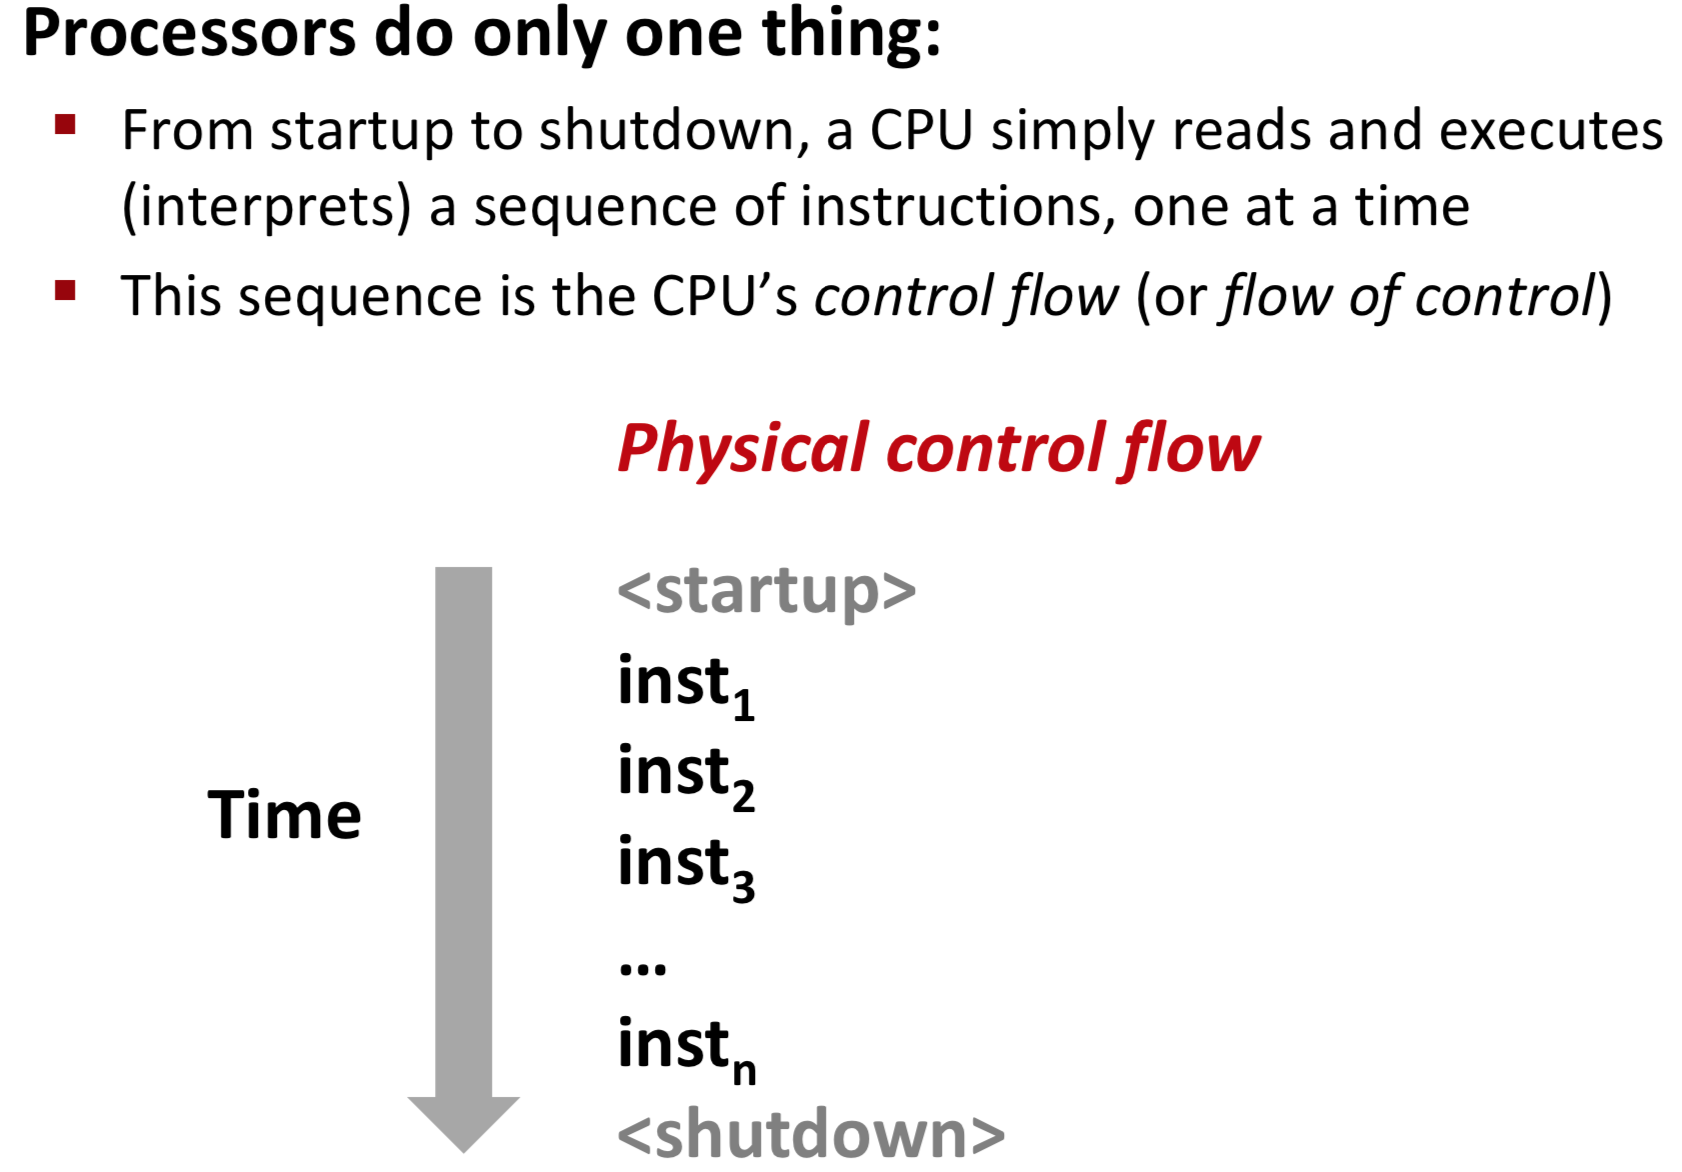 CMU 15-213 Introduction to Computer Systems学习笔记(13) Exceptional Control Flow: Exceptions and Process[通俗易懂]